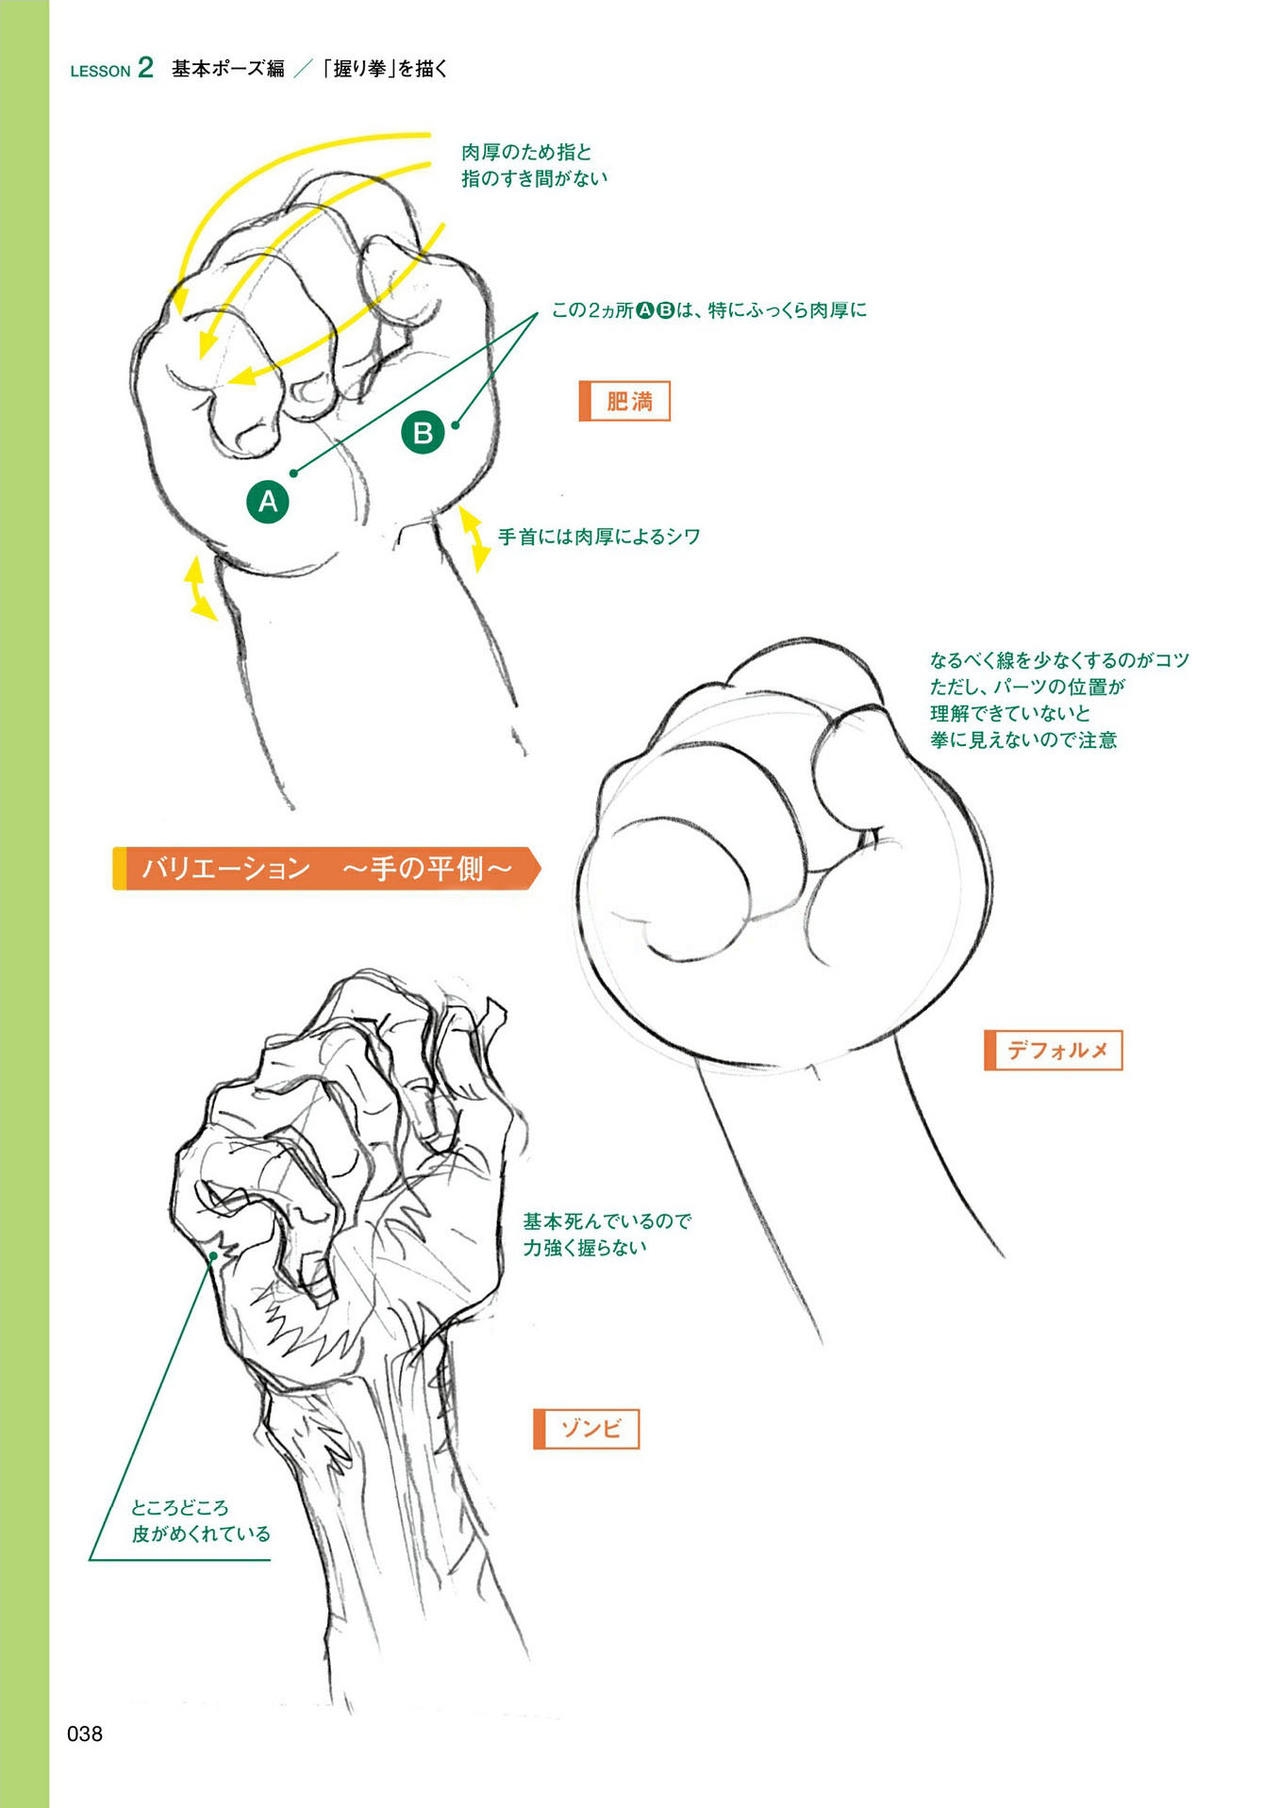 How to draw hands 38